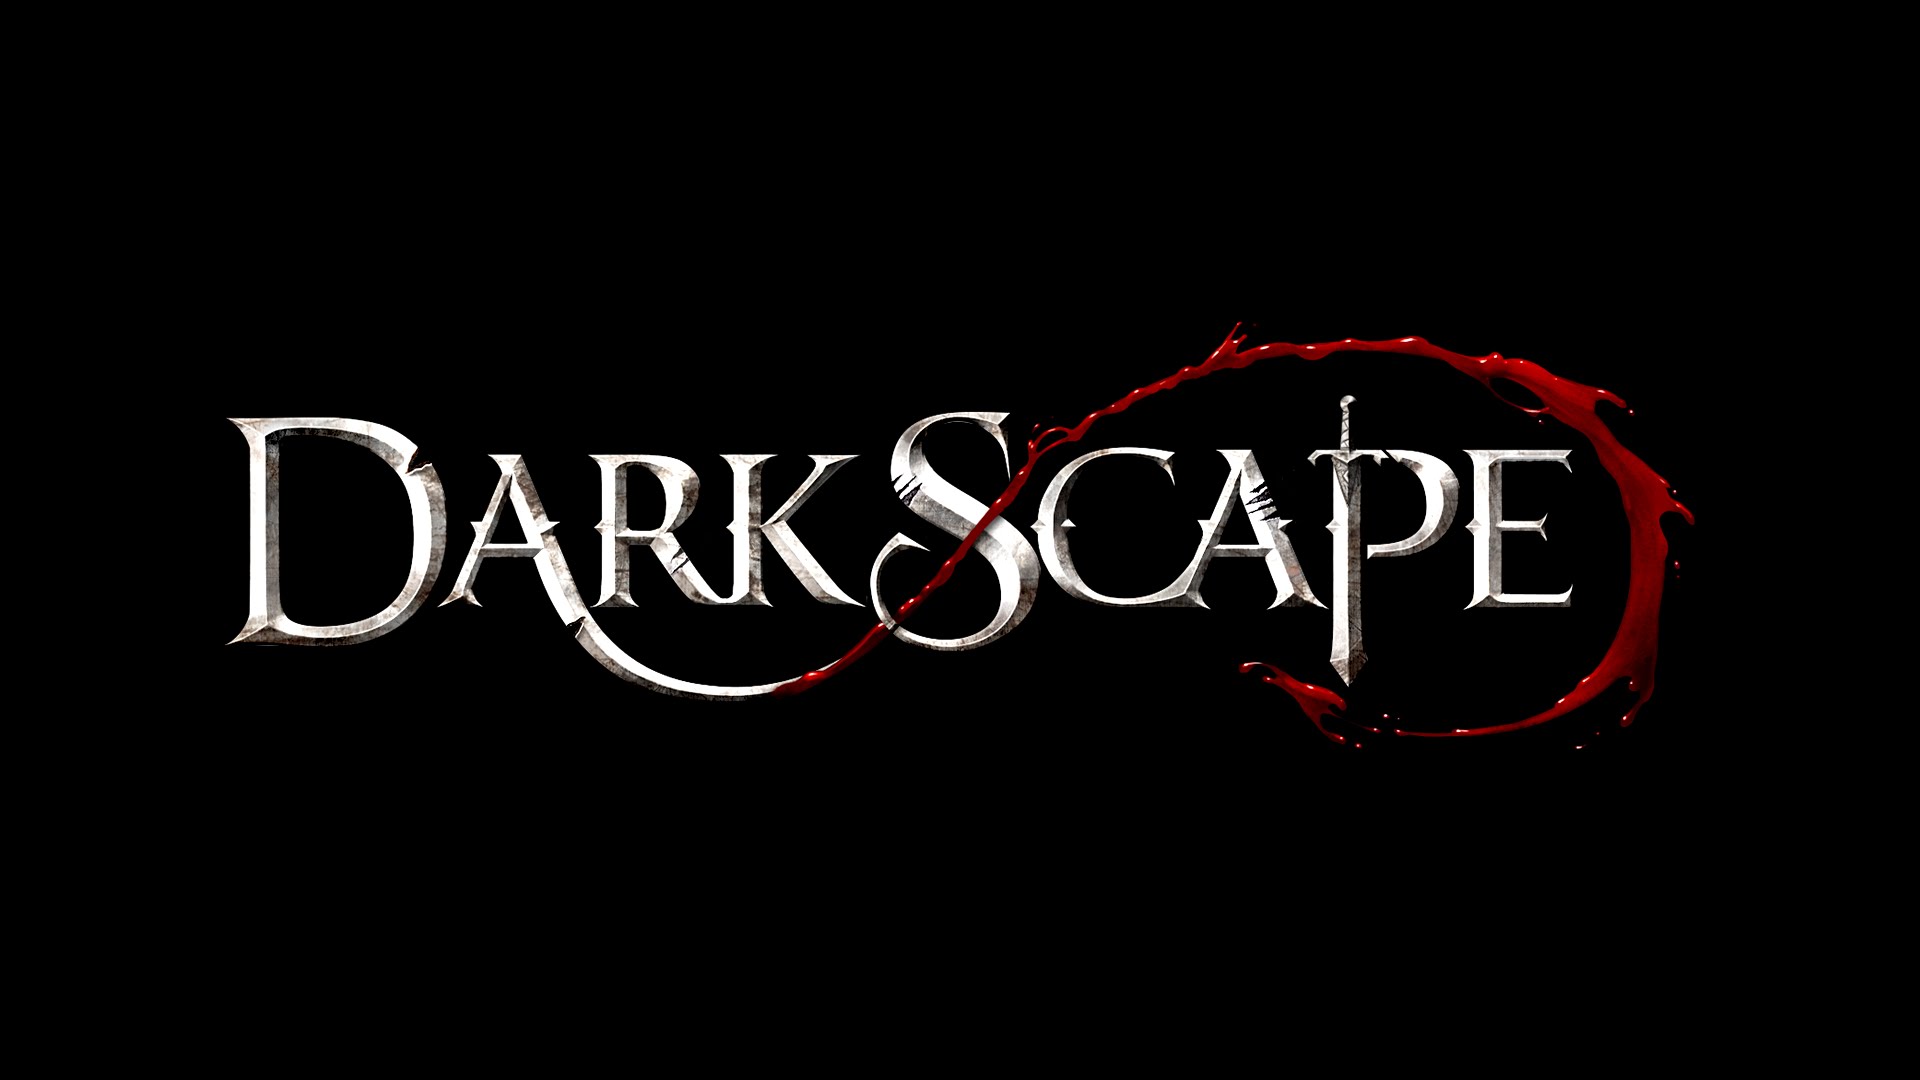 Darkscape Accounts? Oh, Geez, They’re Everywhere!